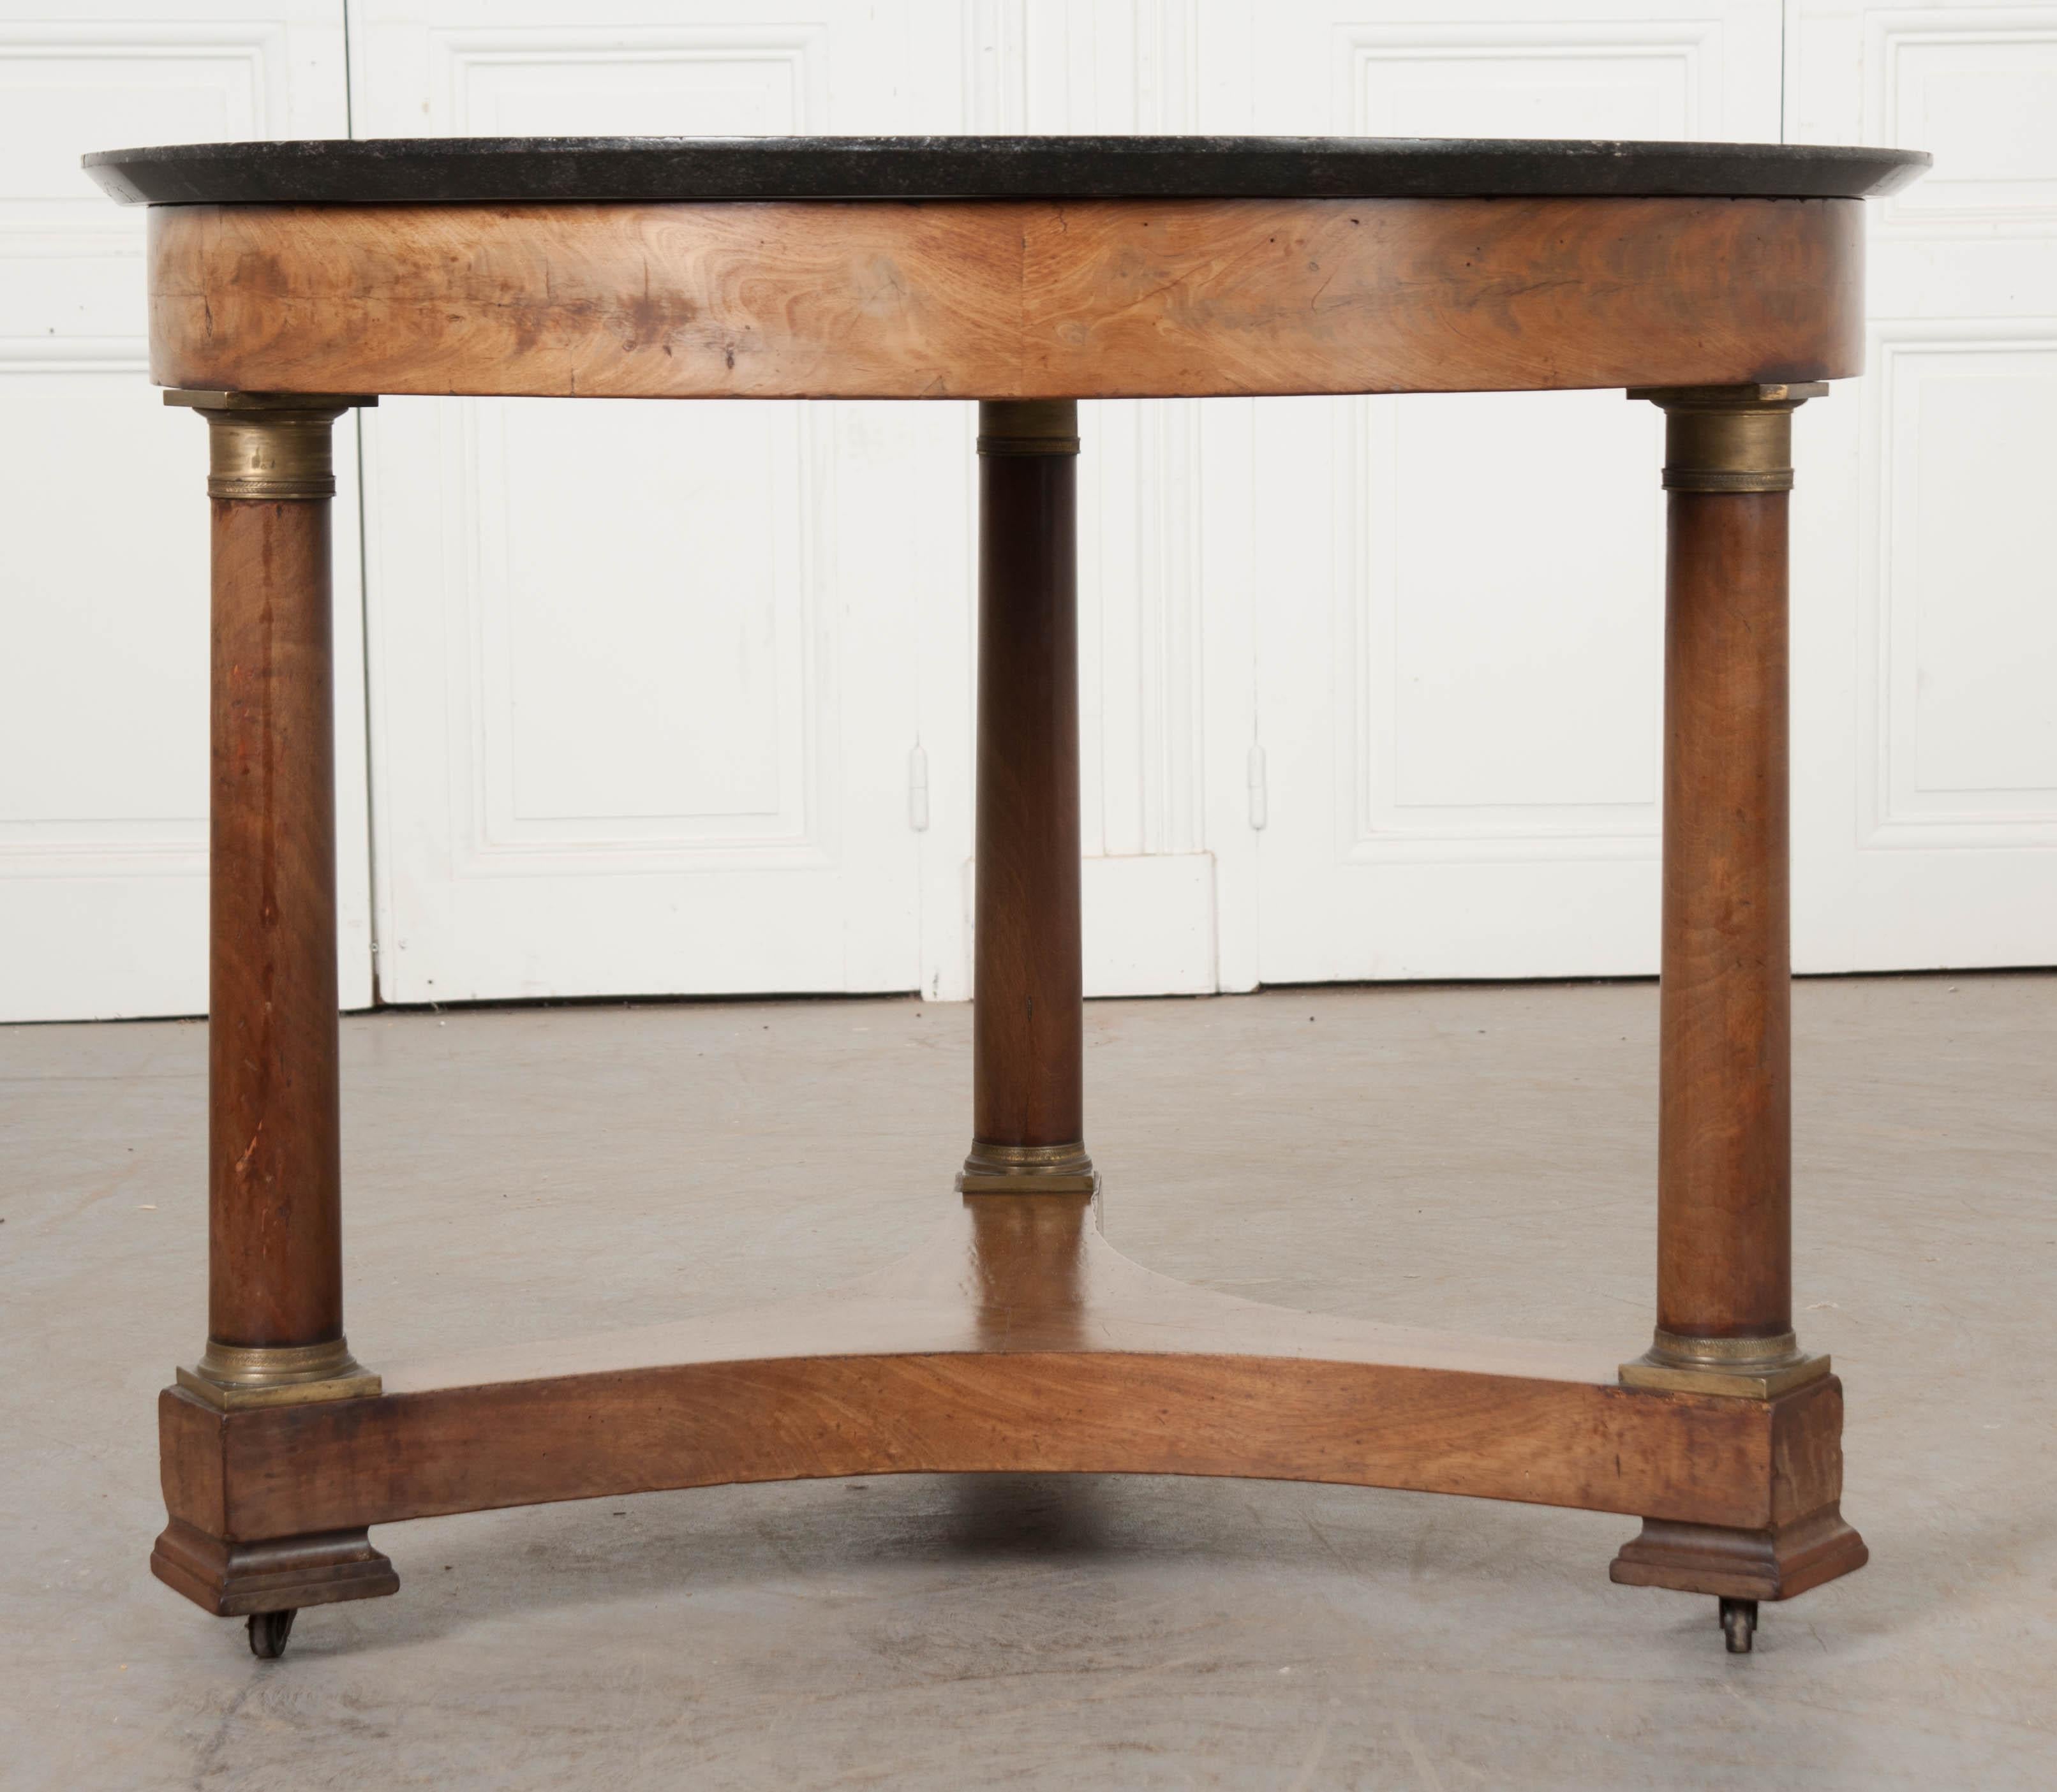 A beautiful, large French Empire round center table with marble top. The black fossil marble top is in wonderful condition and rests atop the circular mahogany veneered apron. The beautifully patinated marble is slightly welled and has an amazing